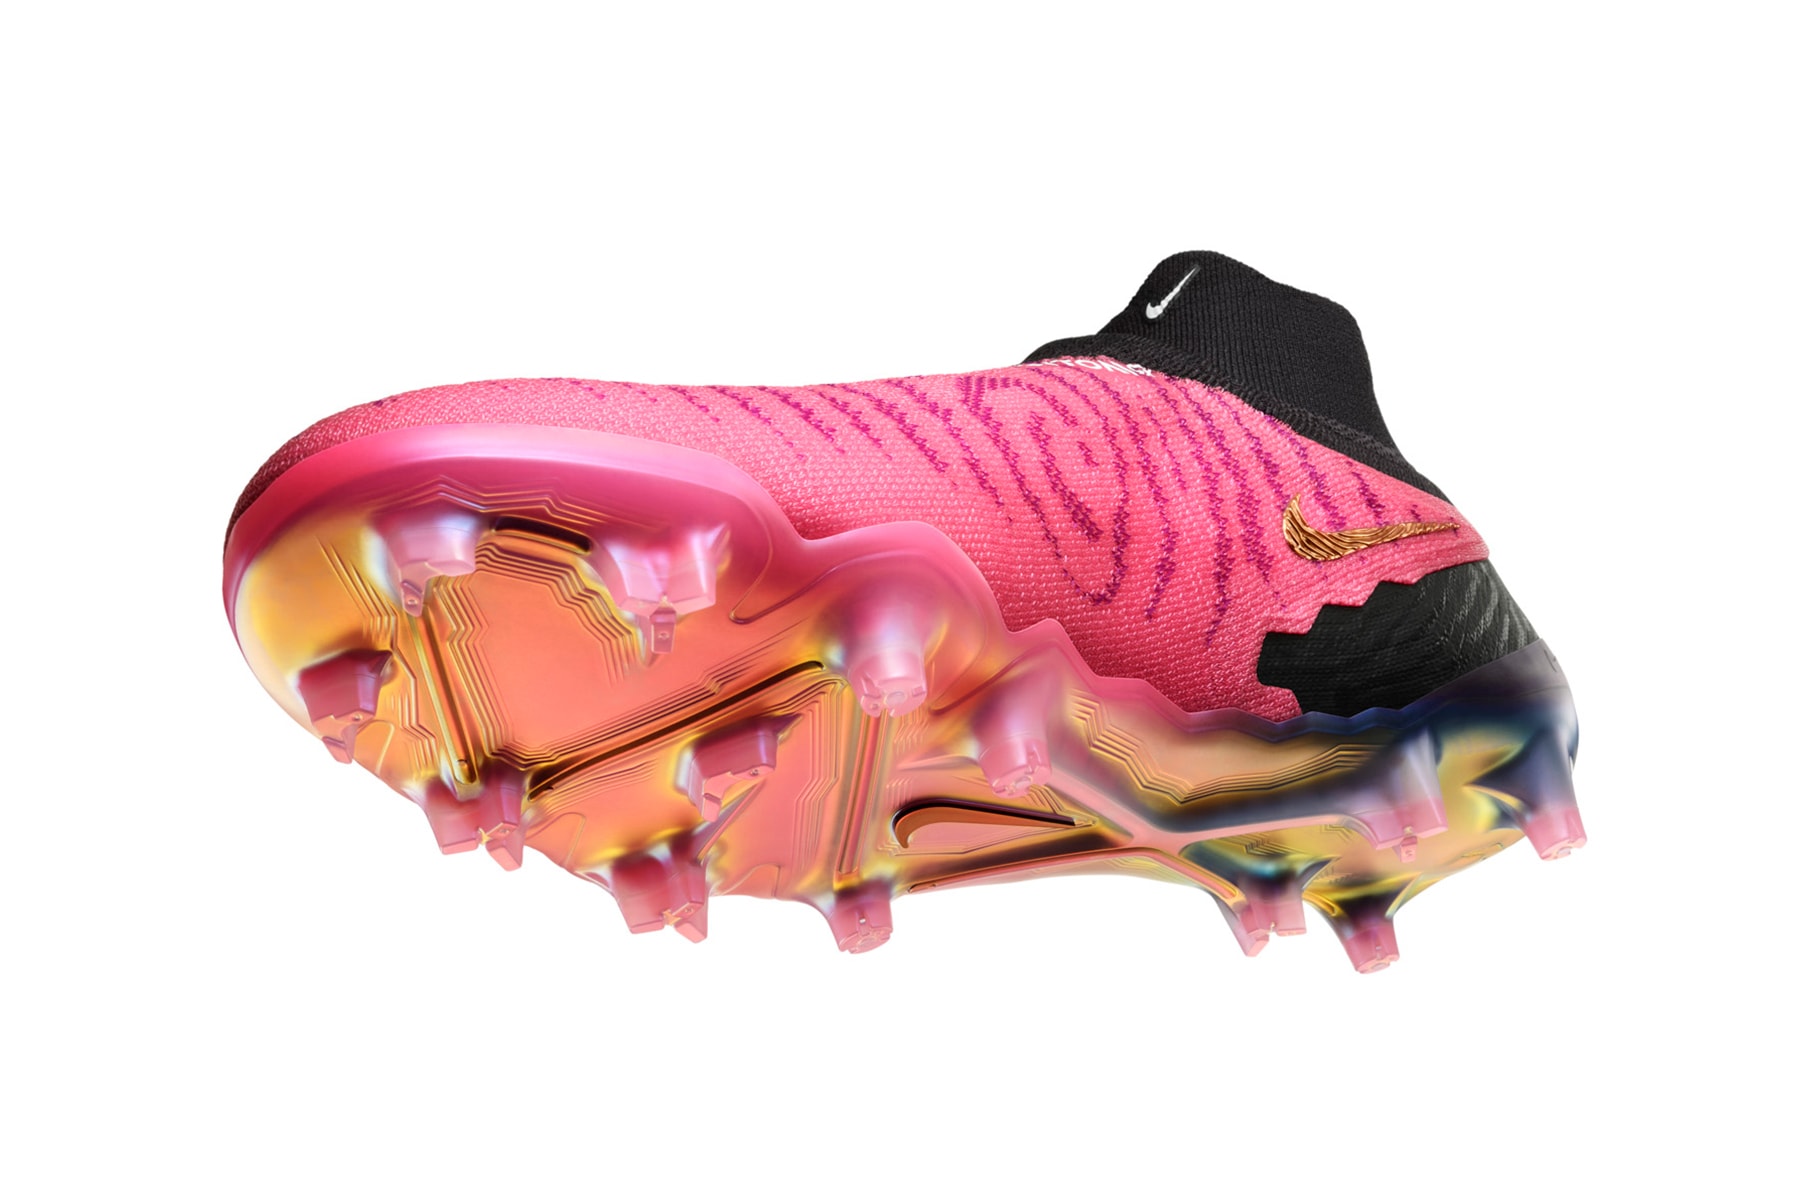 Nike Phantom GX soccer cleat football boot release soccer sports world cup Gripknit Ghost Lace  Phantom Vision 1 2